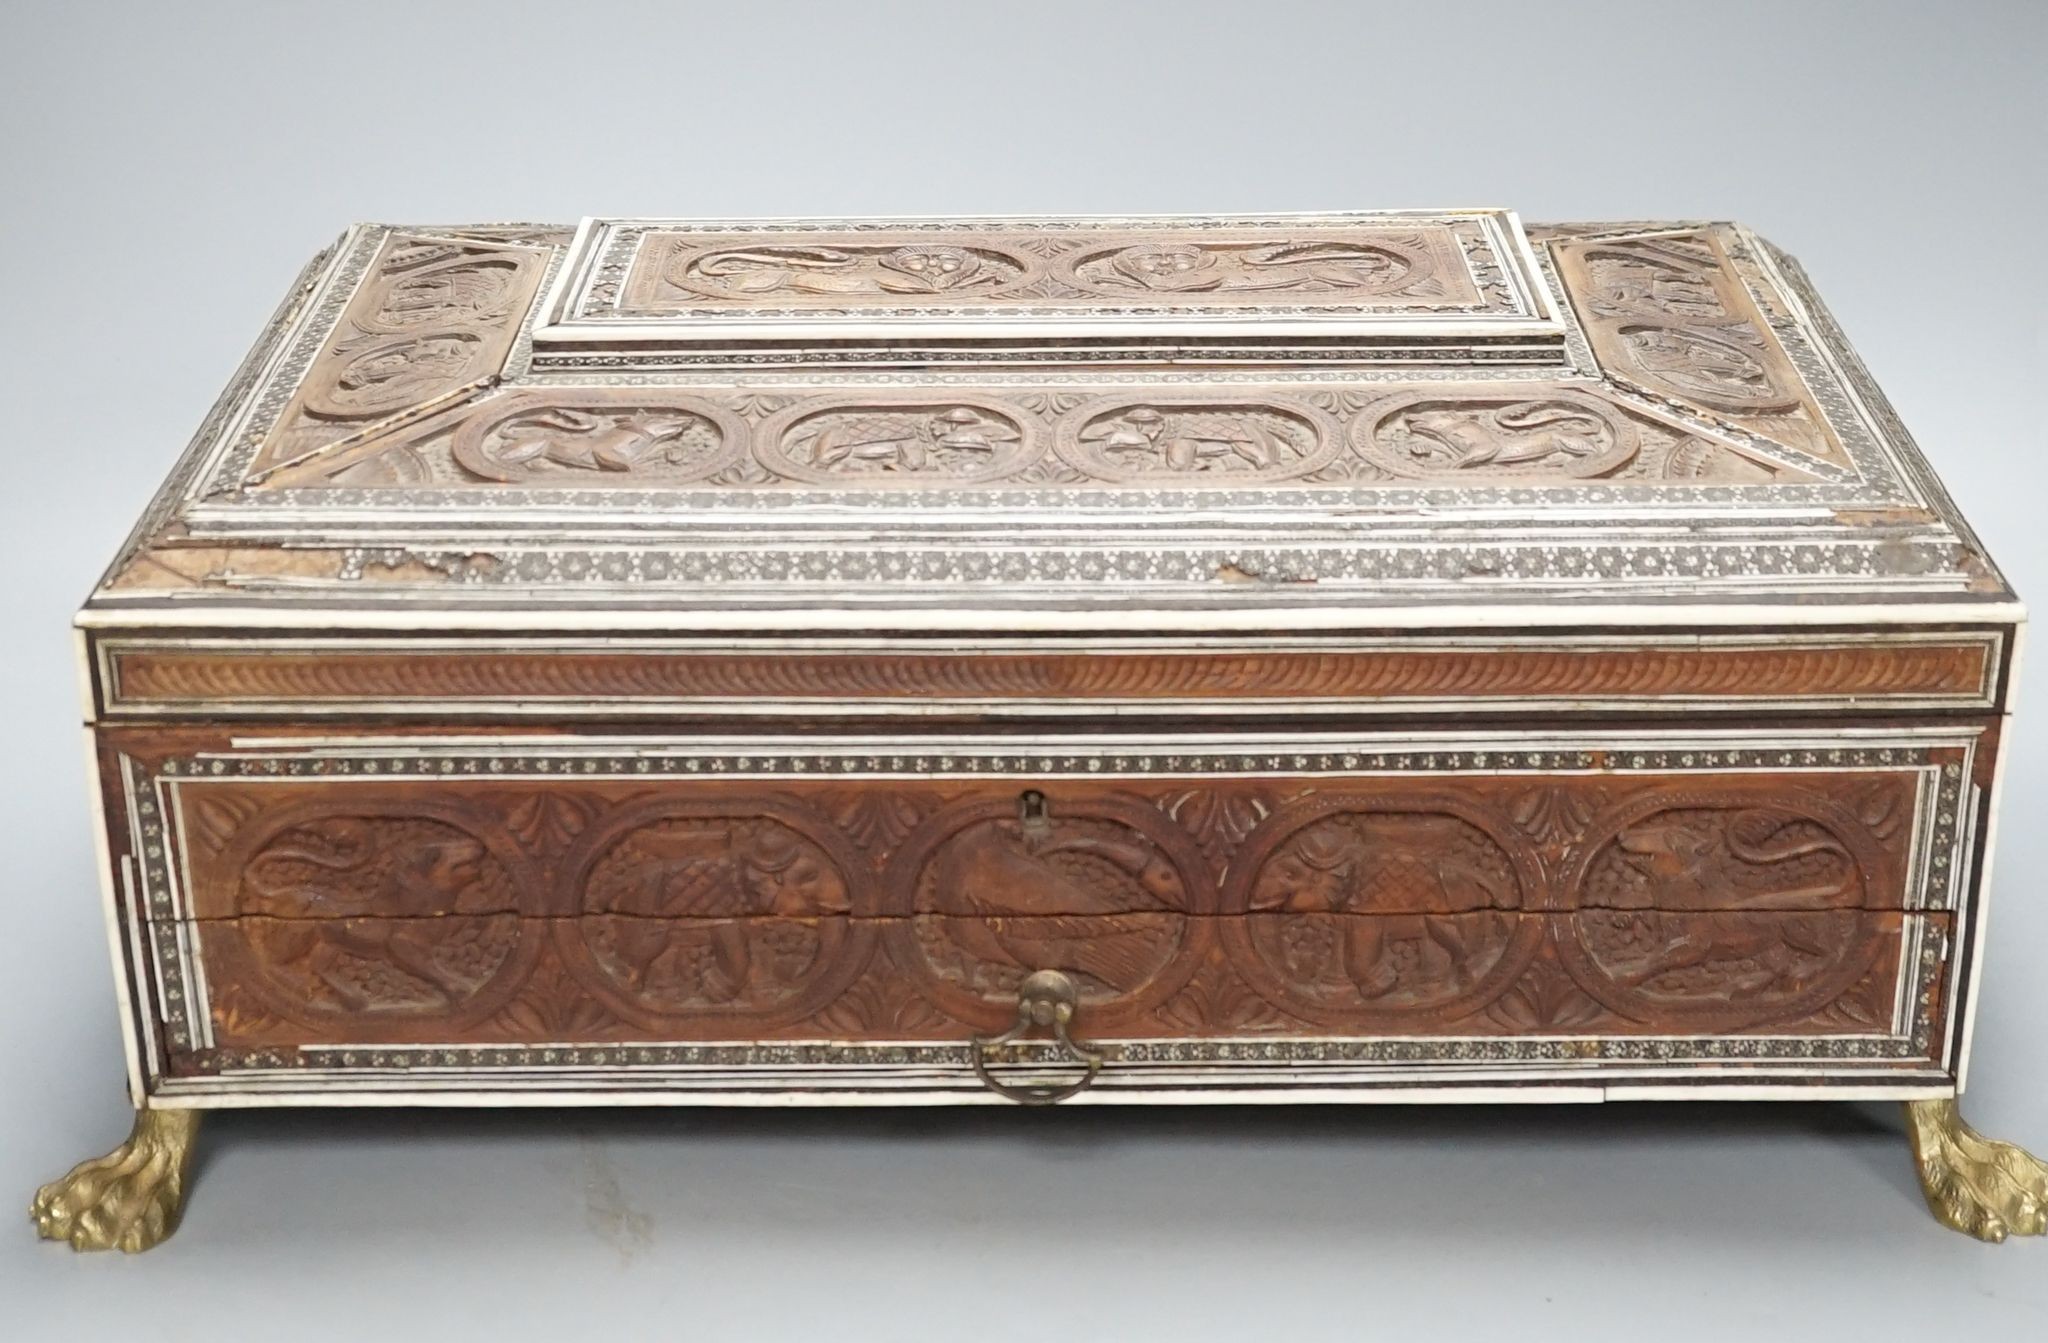 A 19th century South Indian sandalwood sewing box, 44cms wide x 30 deep.